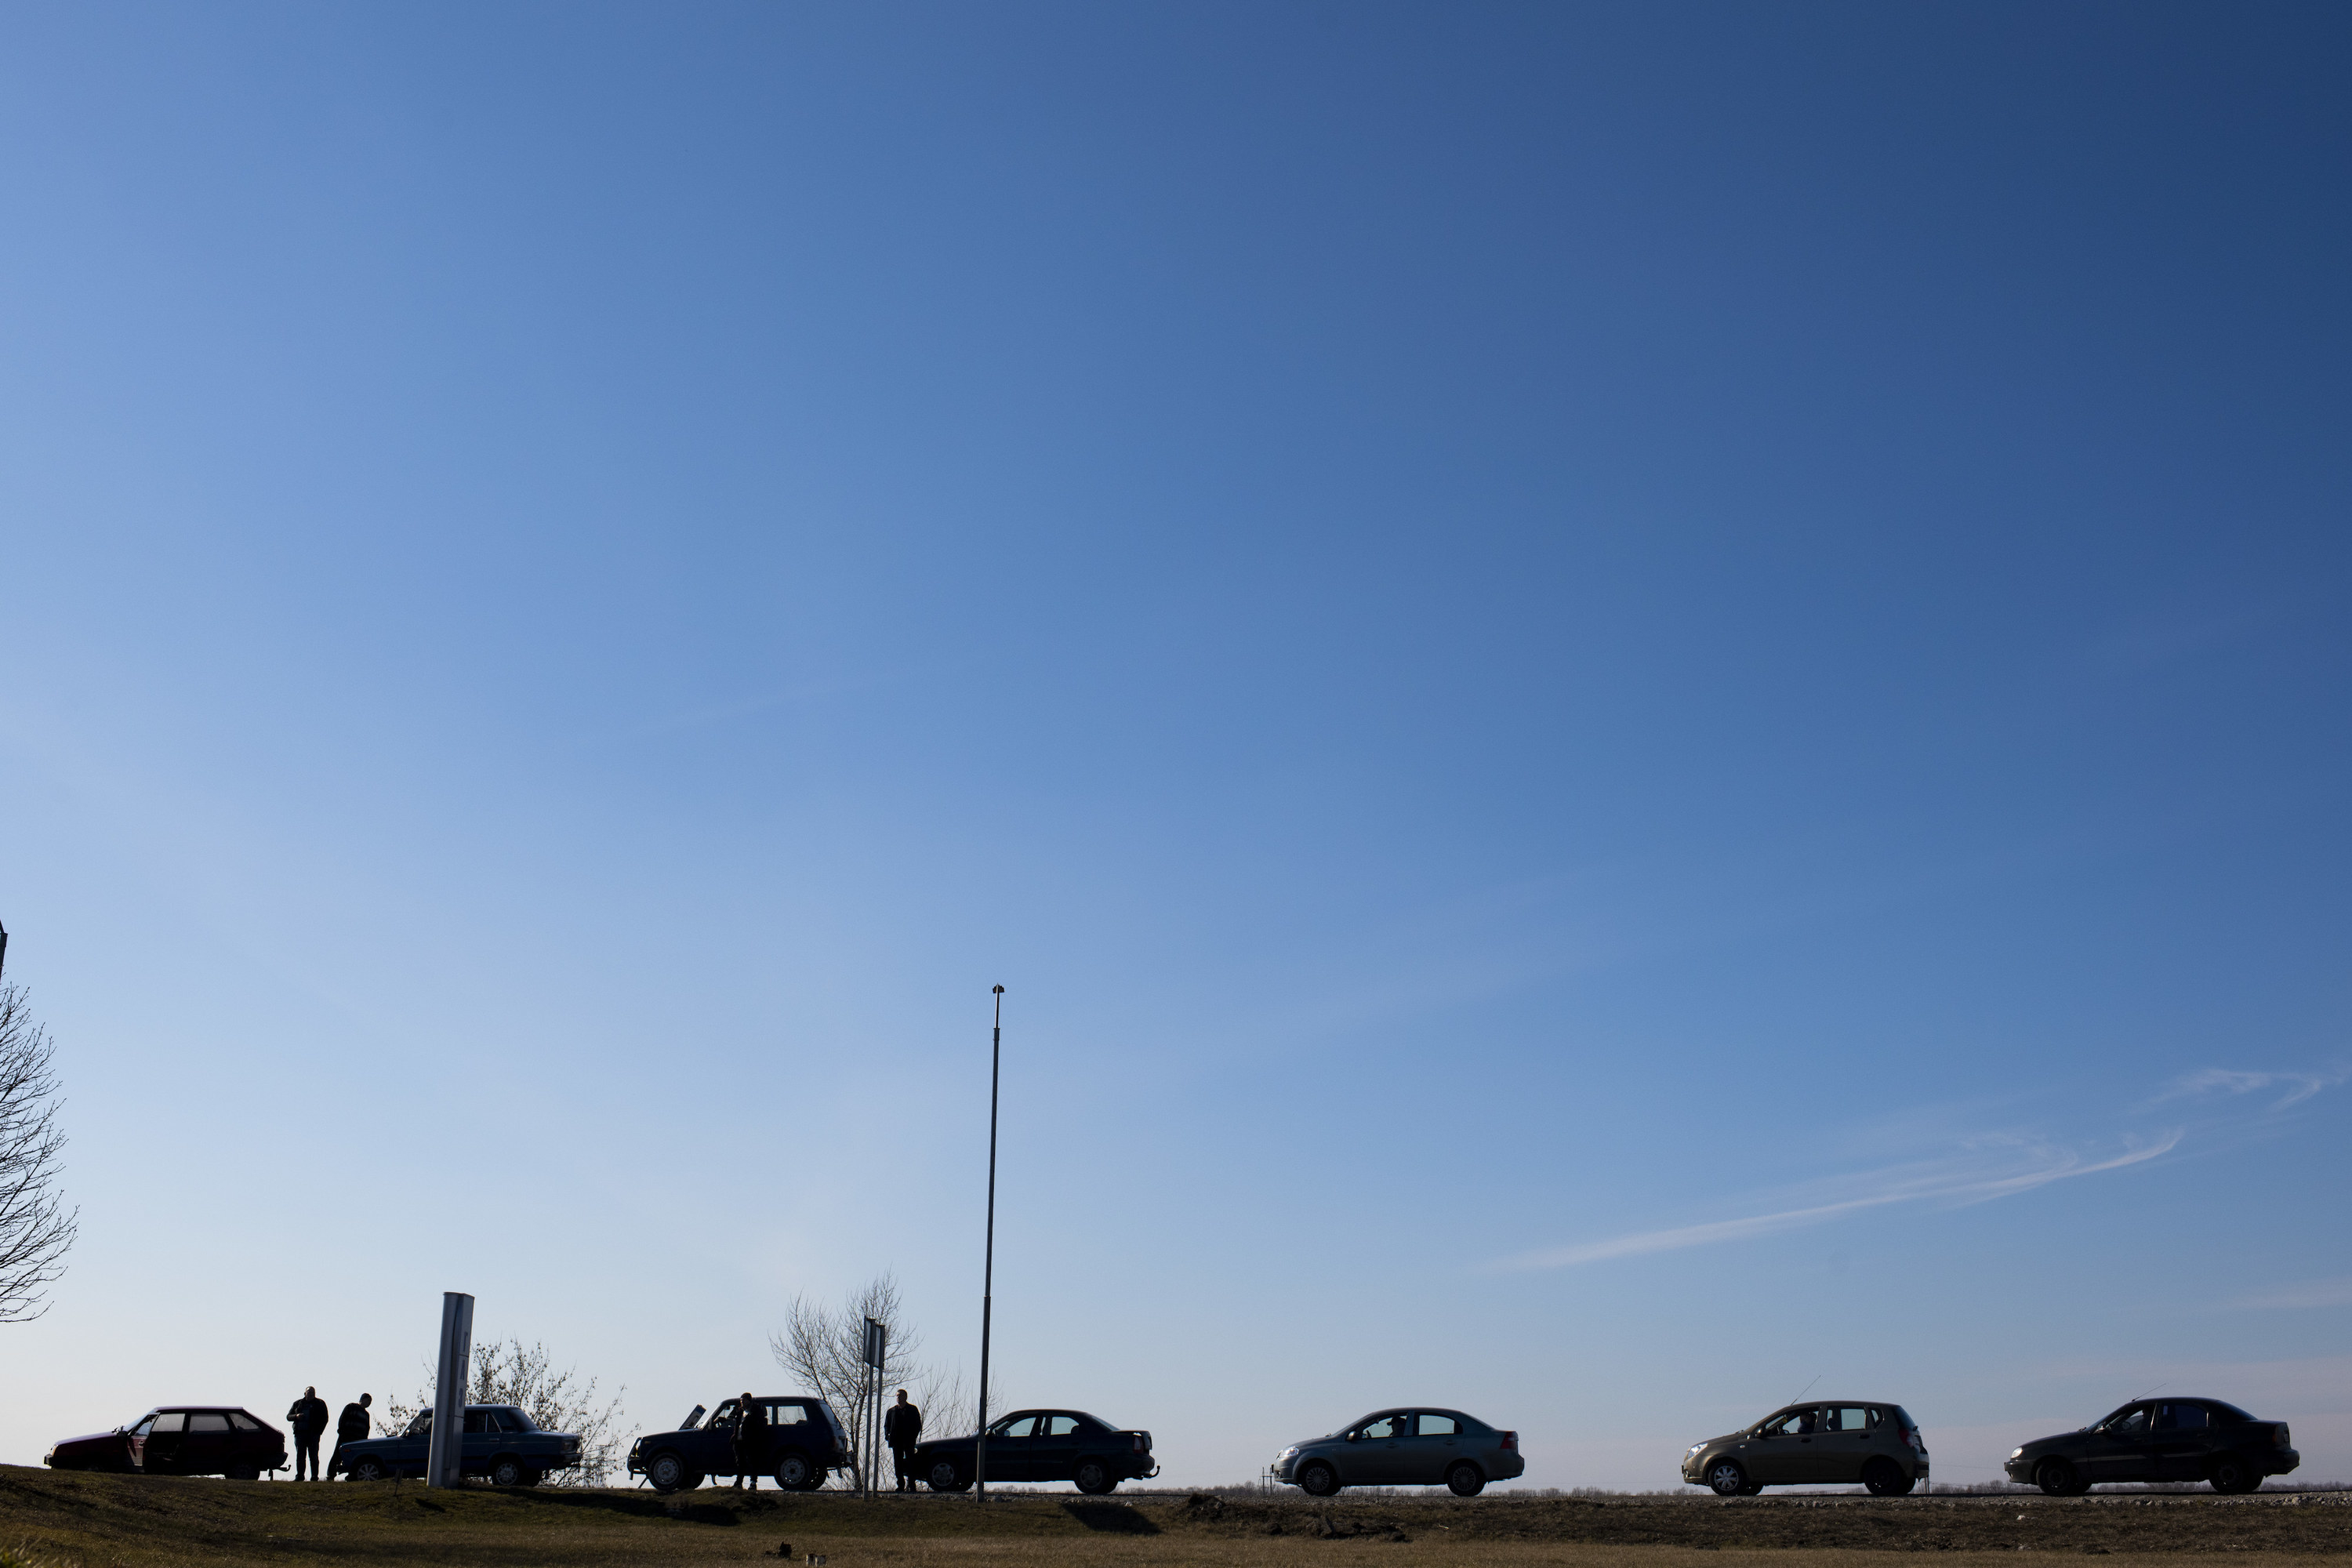 Seven cars wait in a line